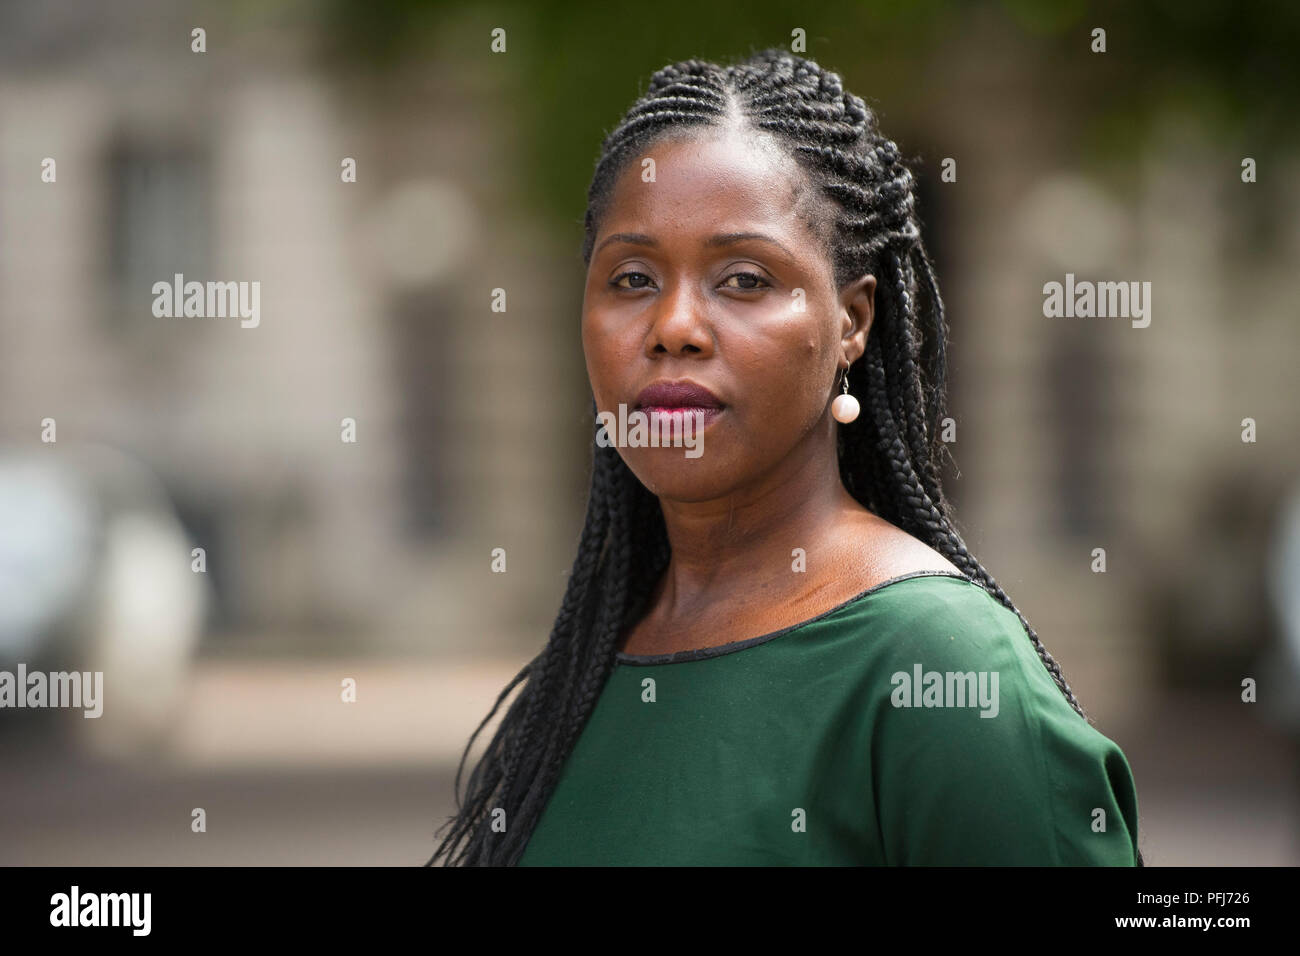 Cllr Evelyn Akoto from Southwark Council, cabinet member for community safety and public health, talks to press after the sentencing of brothers Mohammed Iqbal Bharodawala and Abdul Kadar Bharodawala over the illegal sale of skin whitening products, at Inner London Crown Court in London. Stock Photo